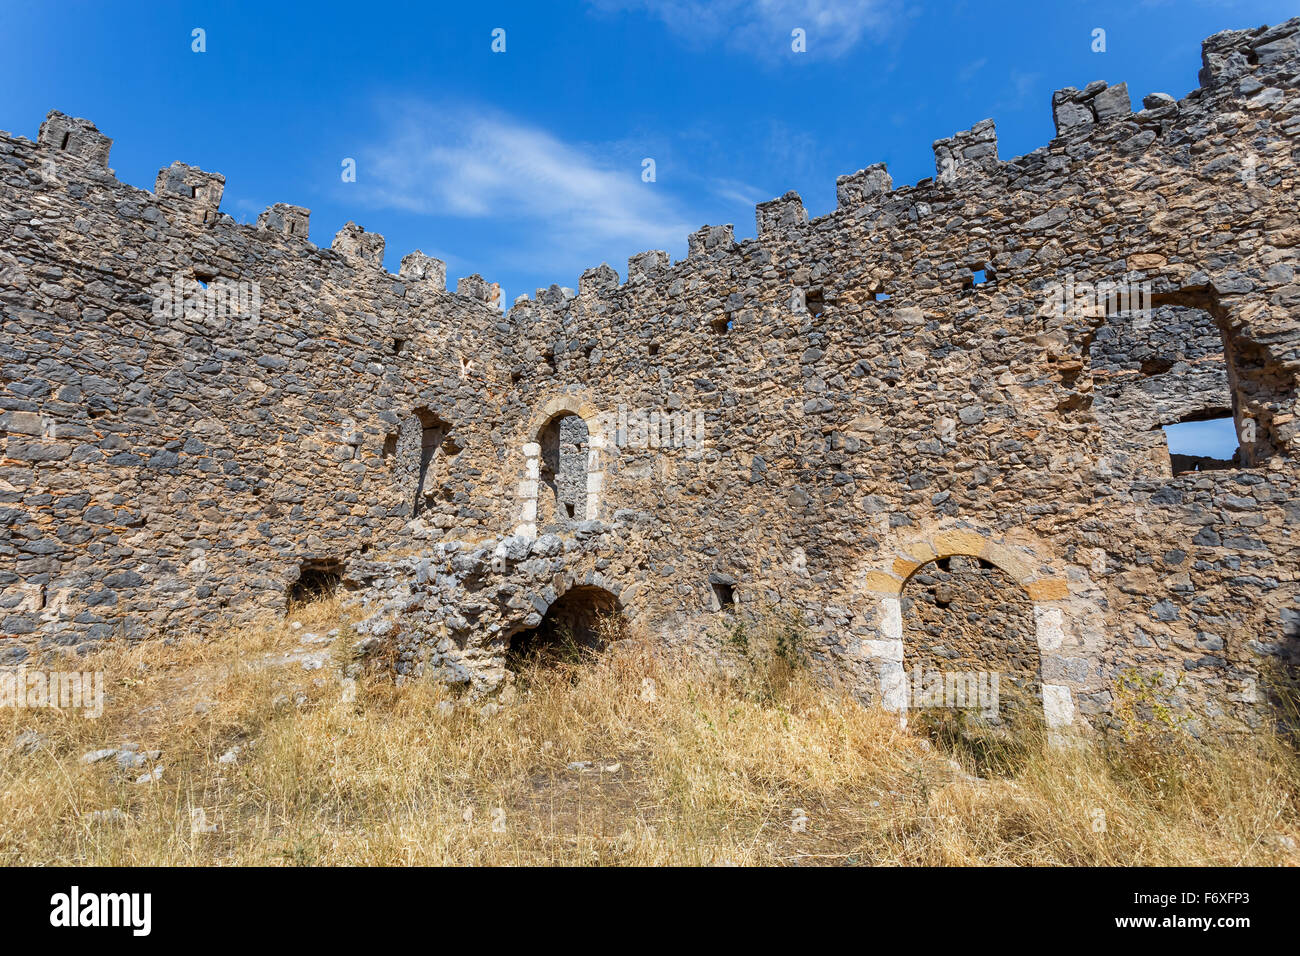 Old picturesque abandoned medieval tower at Messinian Mani in Greece against a blue sky Stock Photo